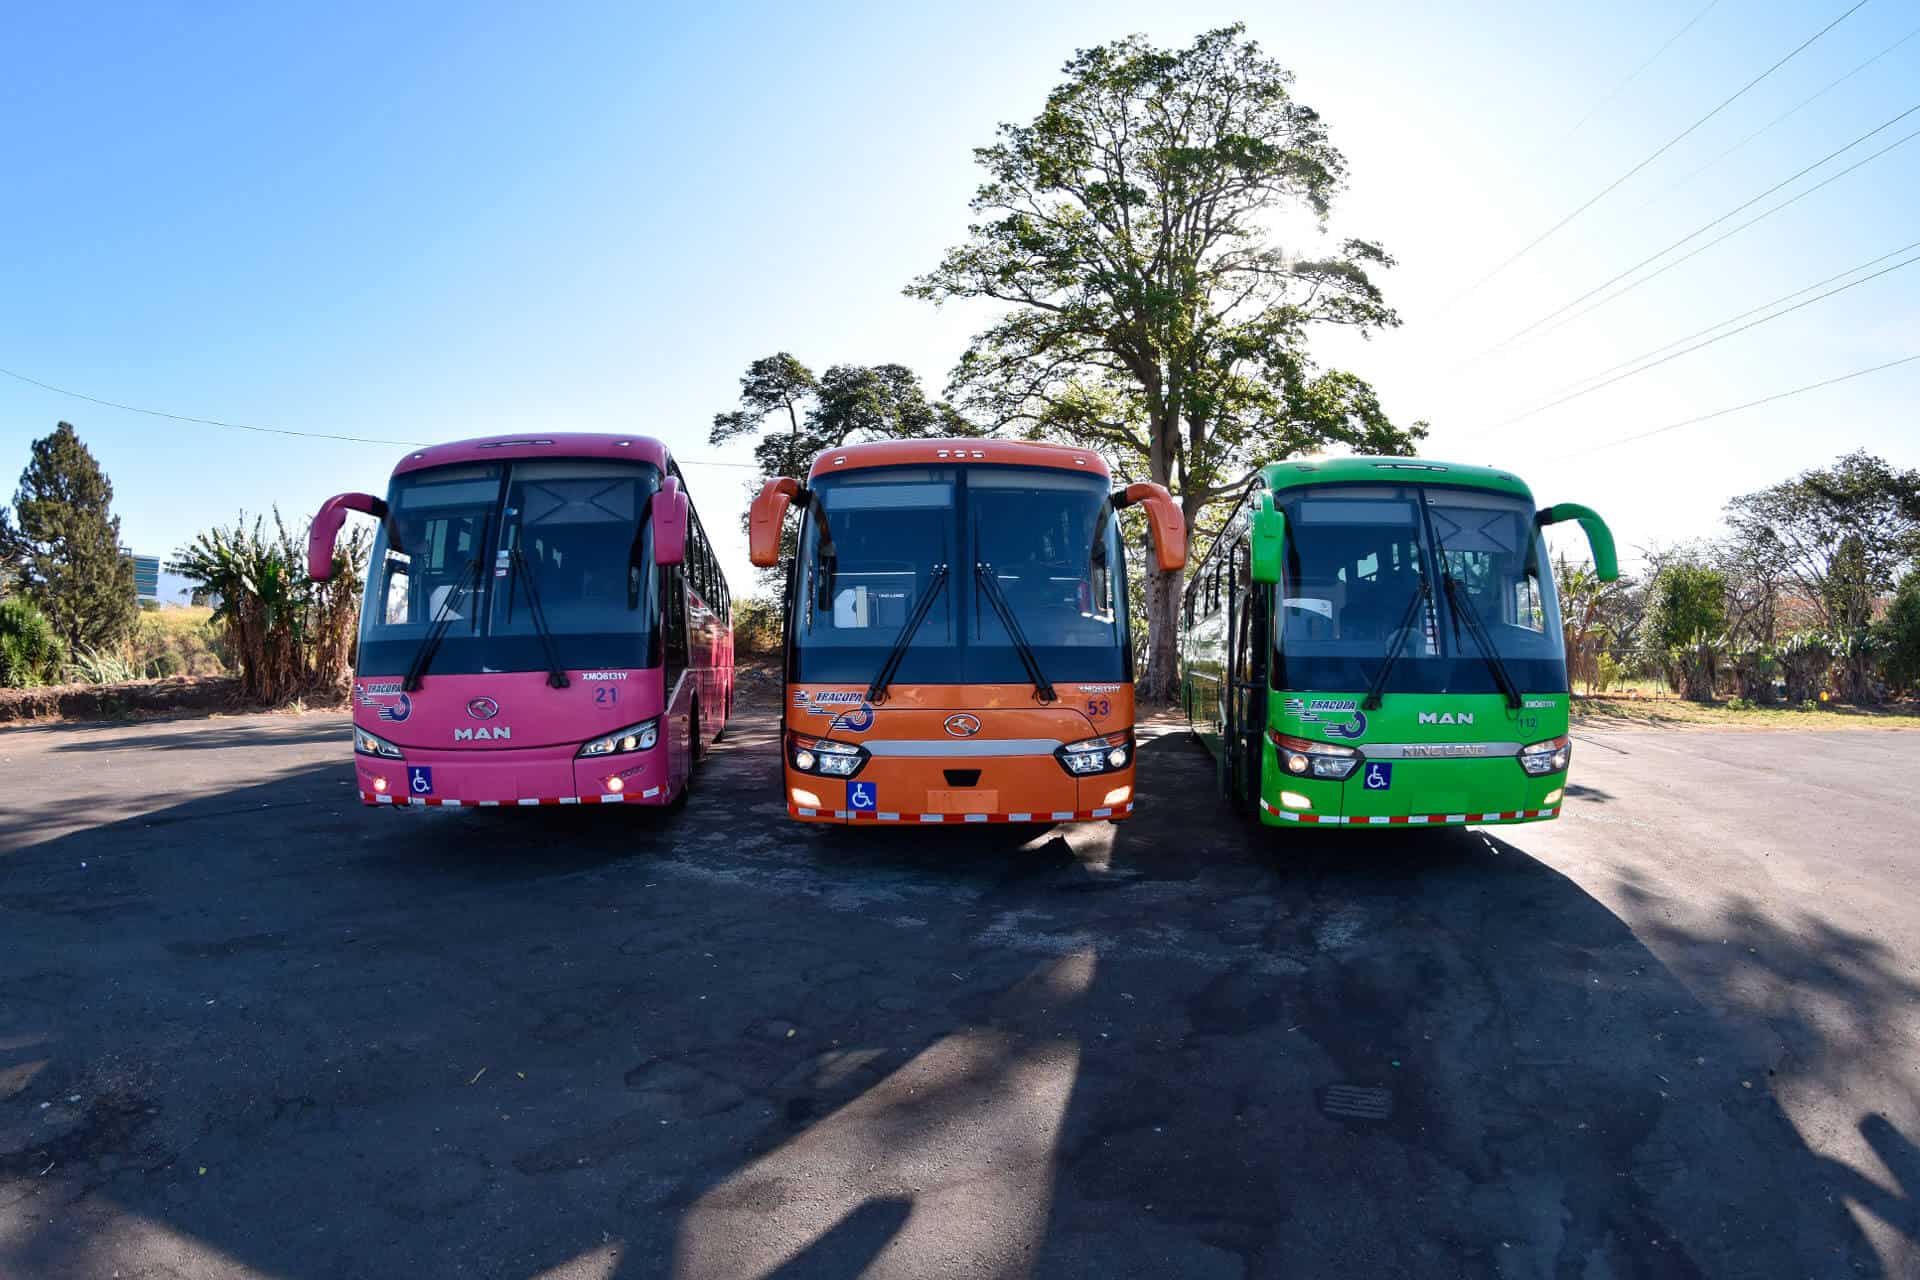 How To Get From Sierpe to Jaco Best Way – All Possible Ways, Sierpe to Jaco, Sierpe to Jaco transfer, cheapest way from Sierpe to Jaco, bus from Sierpe to Jaco, from Sierpe to Jaco by bus, best way from Sierpe to Jaco, taxi from Sierpe to Jaco, private transfer from Sierpe to Jaco, Shared Van from Sierpe to Jaco, rent a car in Sierpe, uber from Sierpe to Jaco